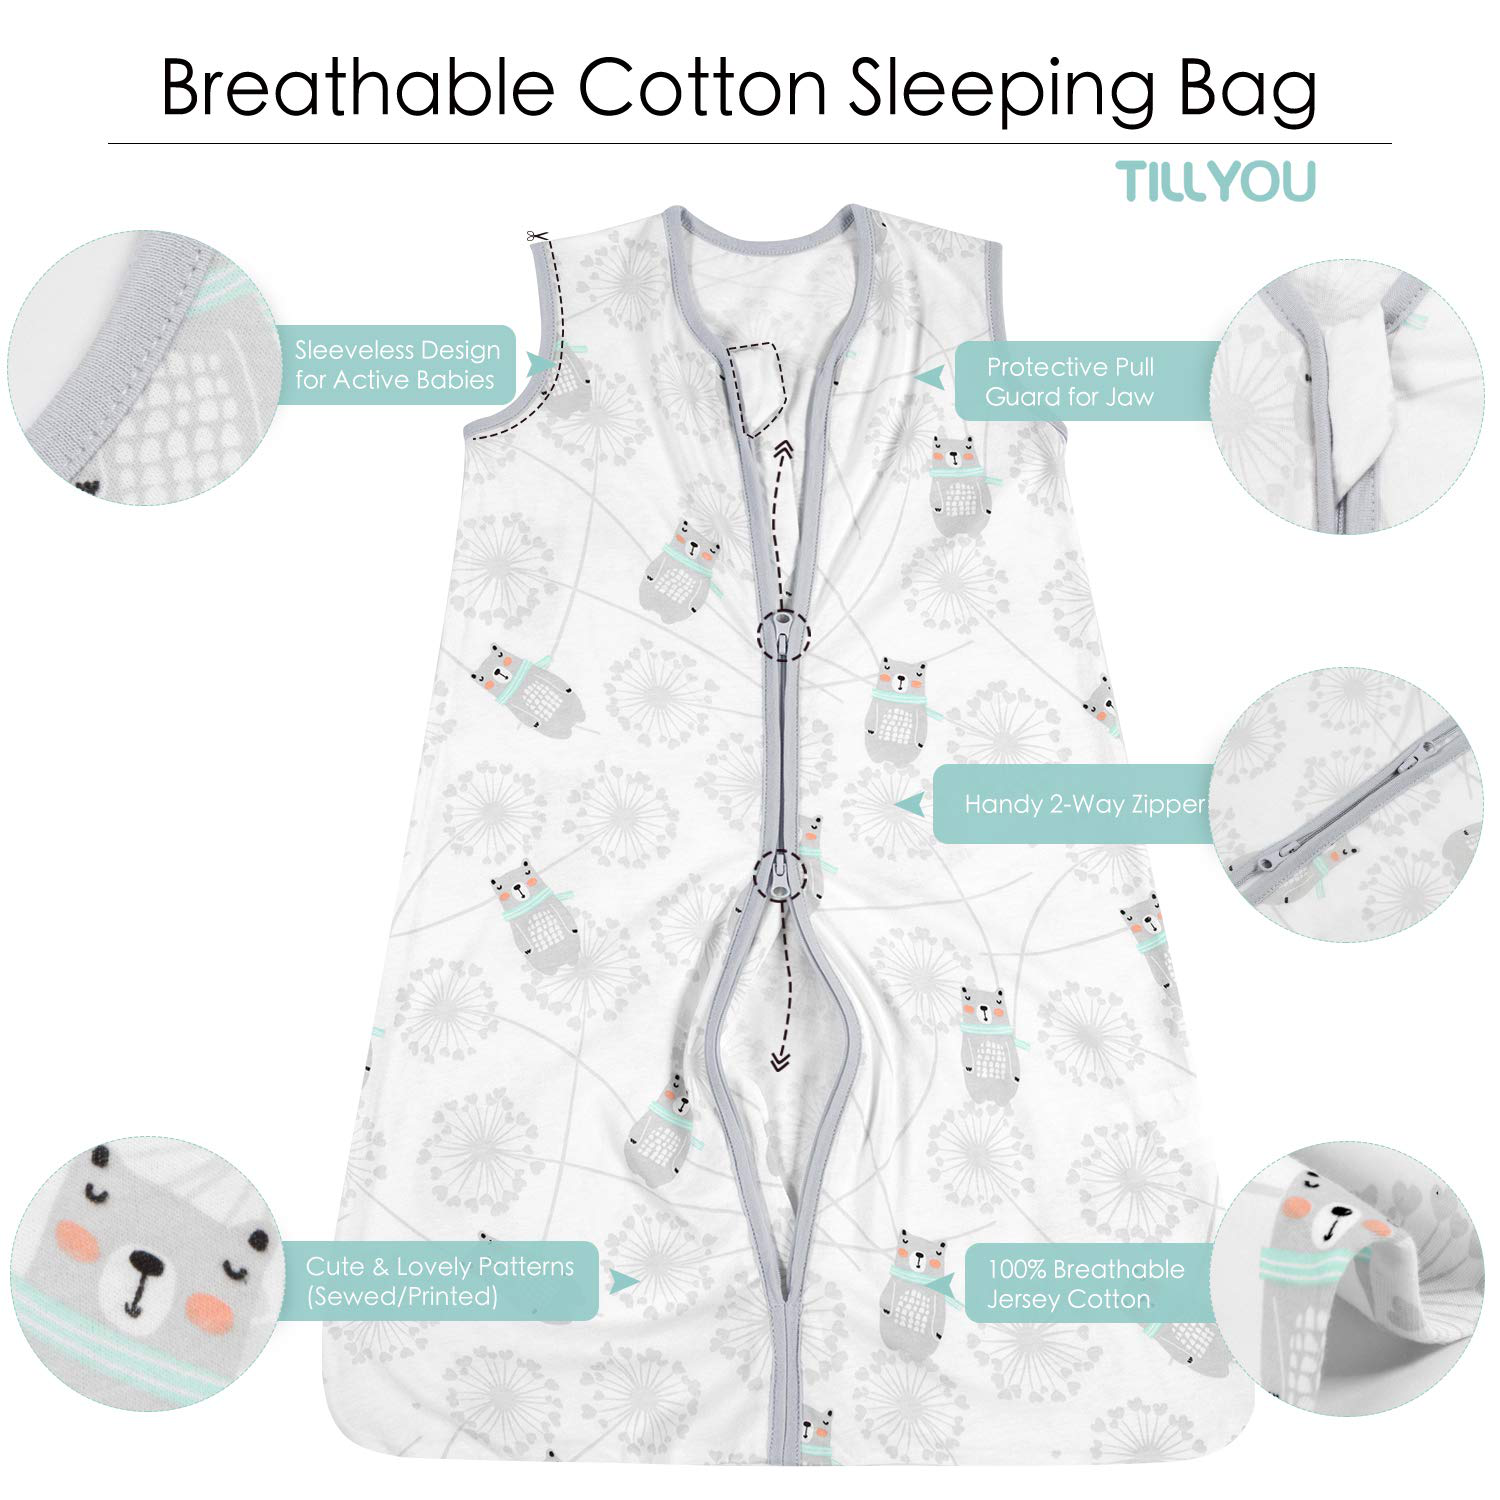 2 Pack TILLYOU Breathable Cotton Baby Wearable Blanket with 2-Way Zipper, Super Soft Lightweight 2-Pack Sleeveless Sleep Bag Sack